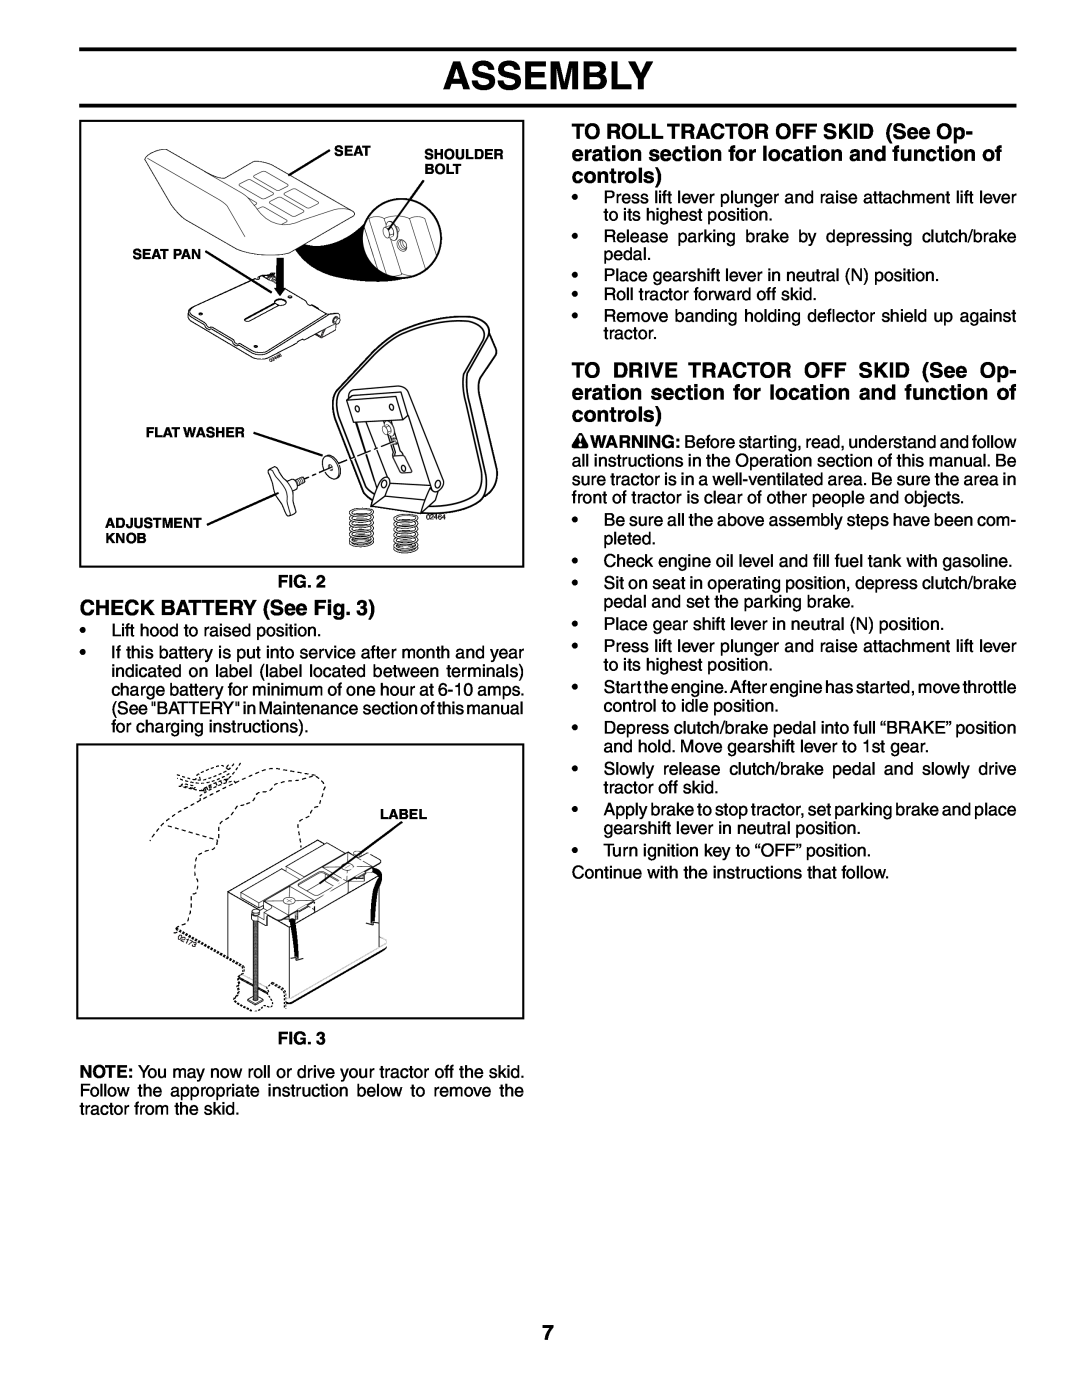 Poulan 194993 manual CHECK BATTERY See Fig, Assembly 